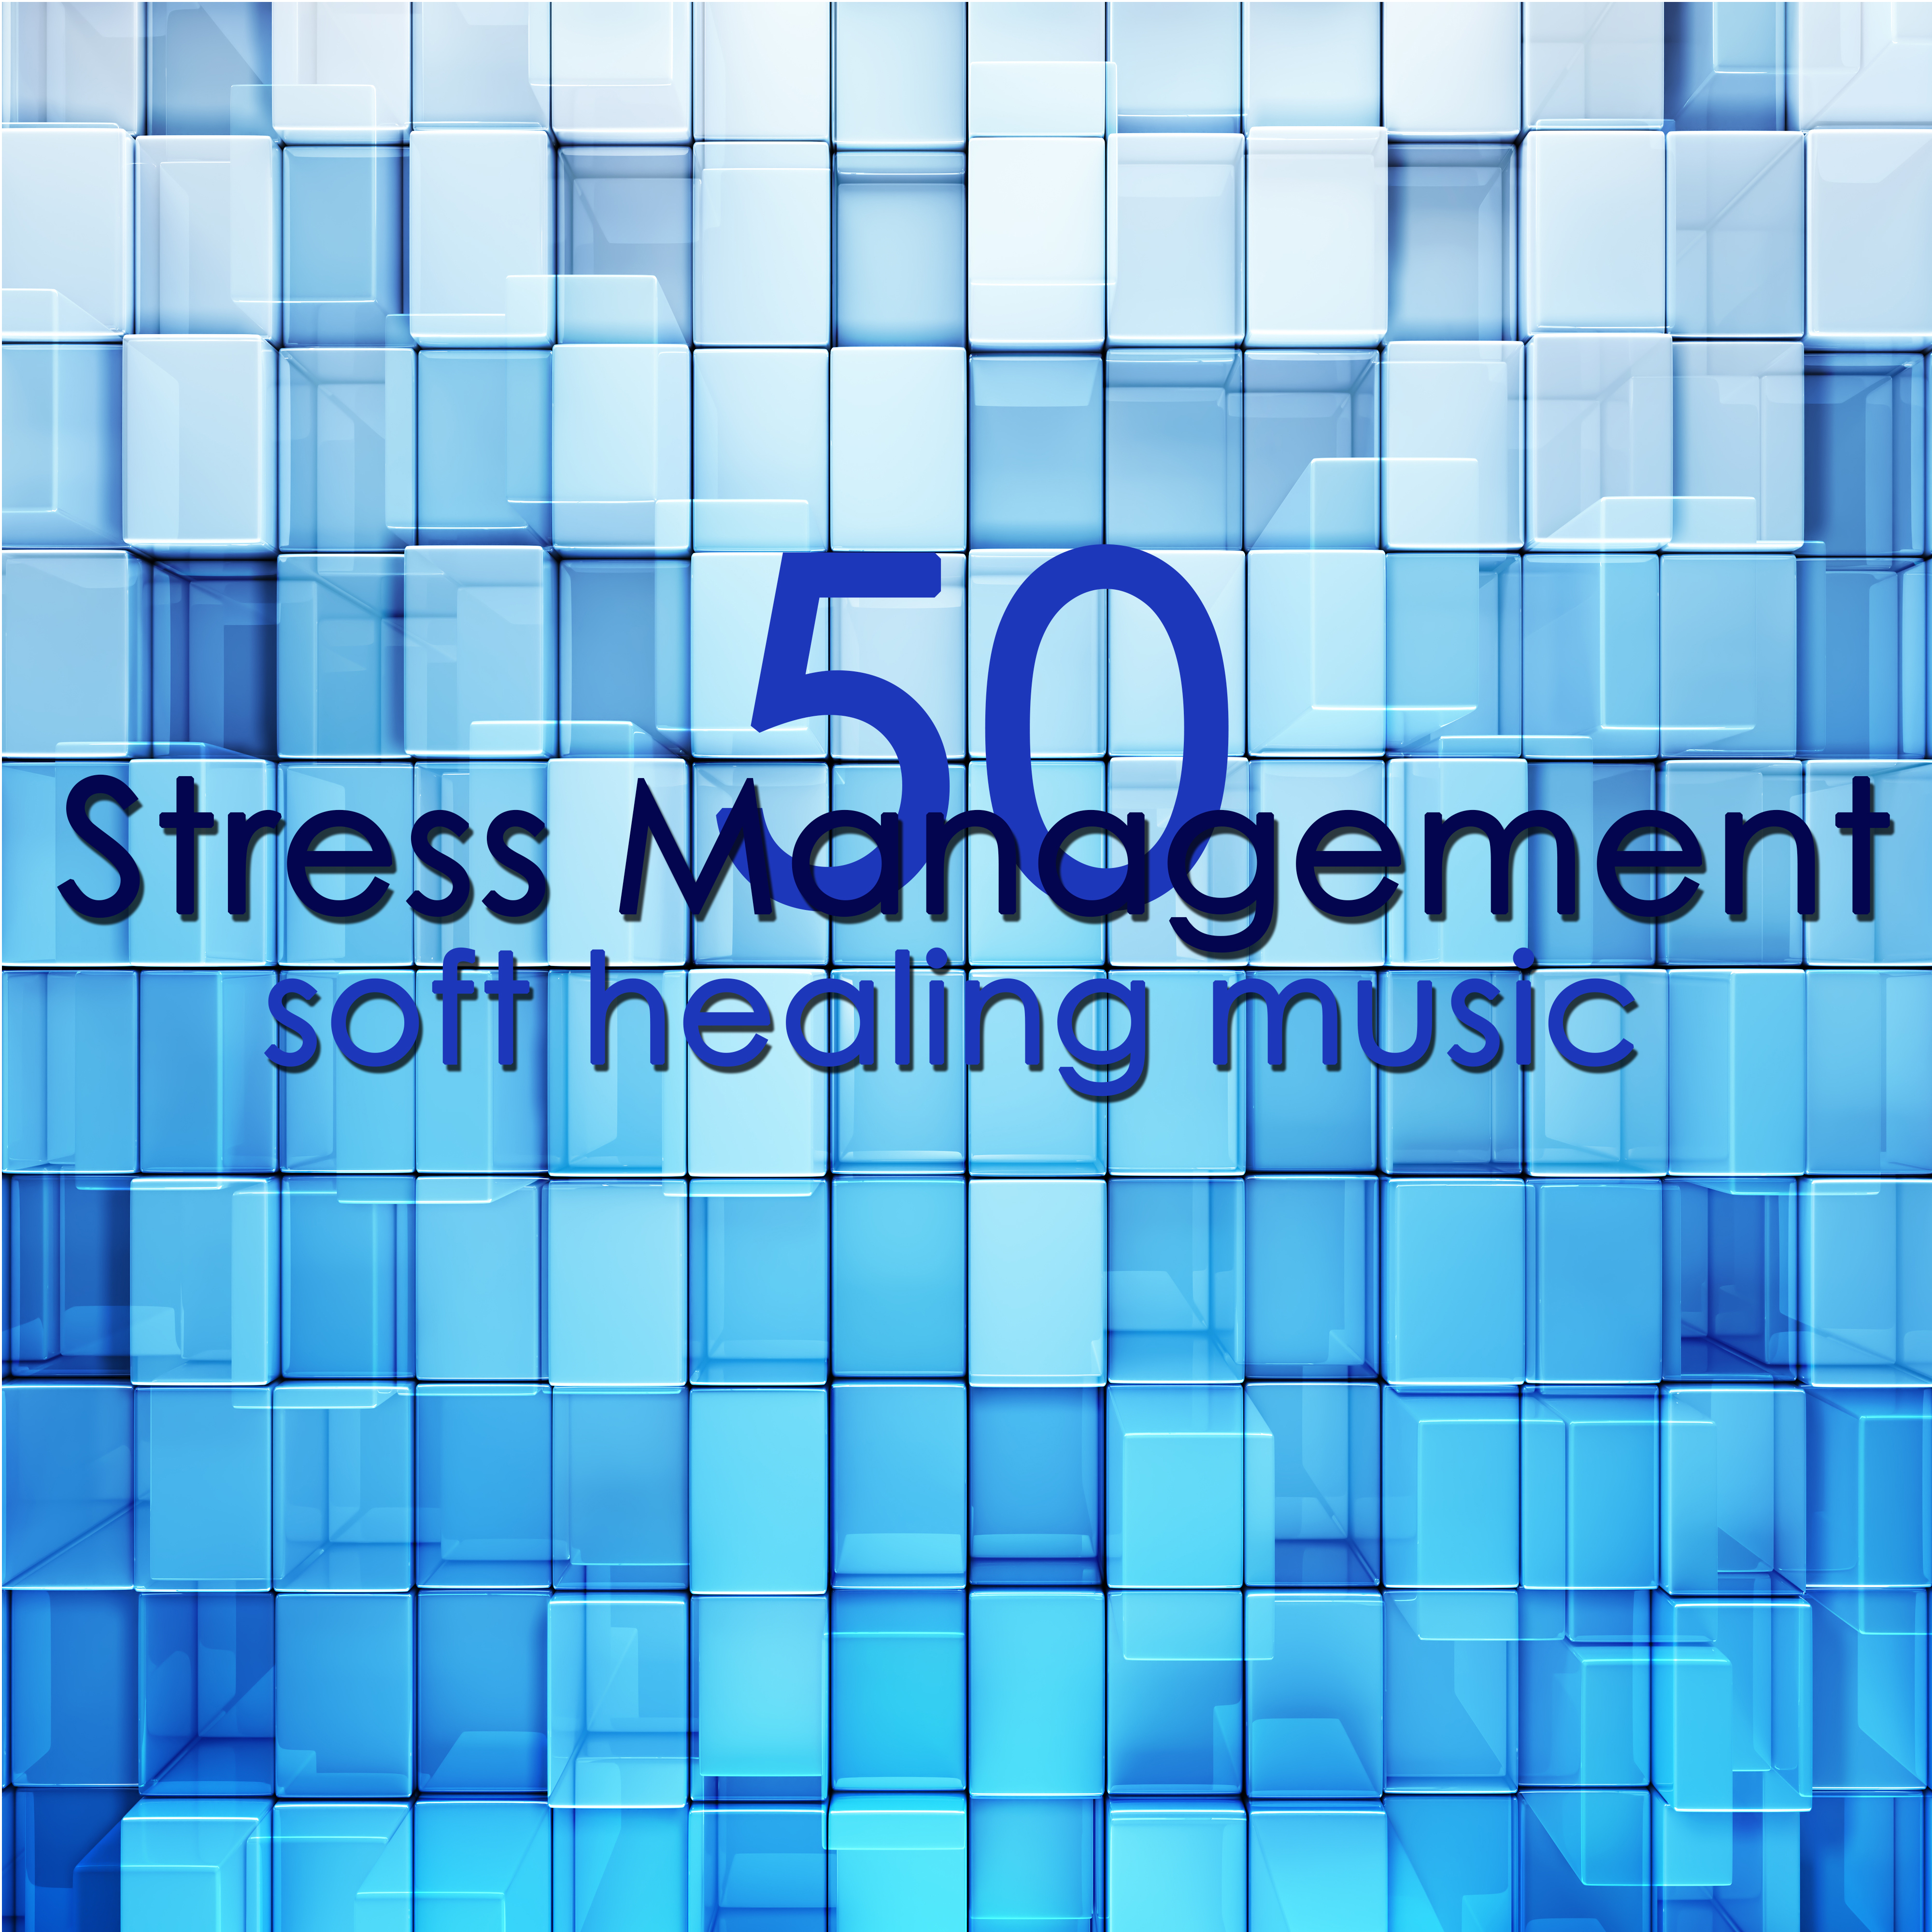 How to Manage Stress with Music